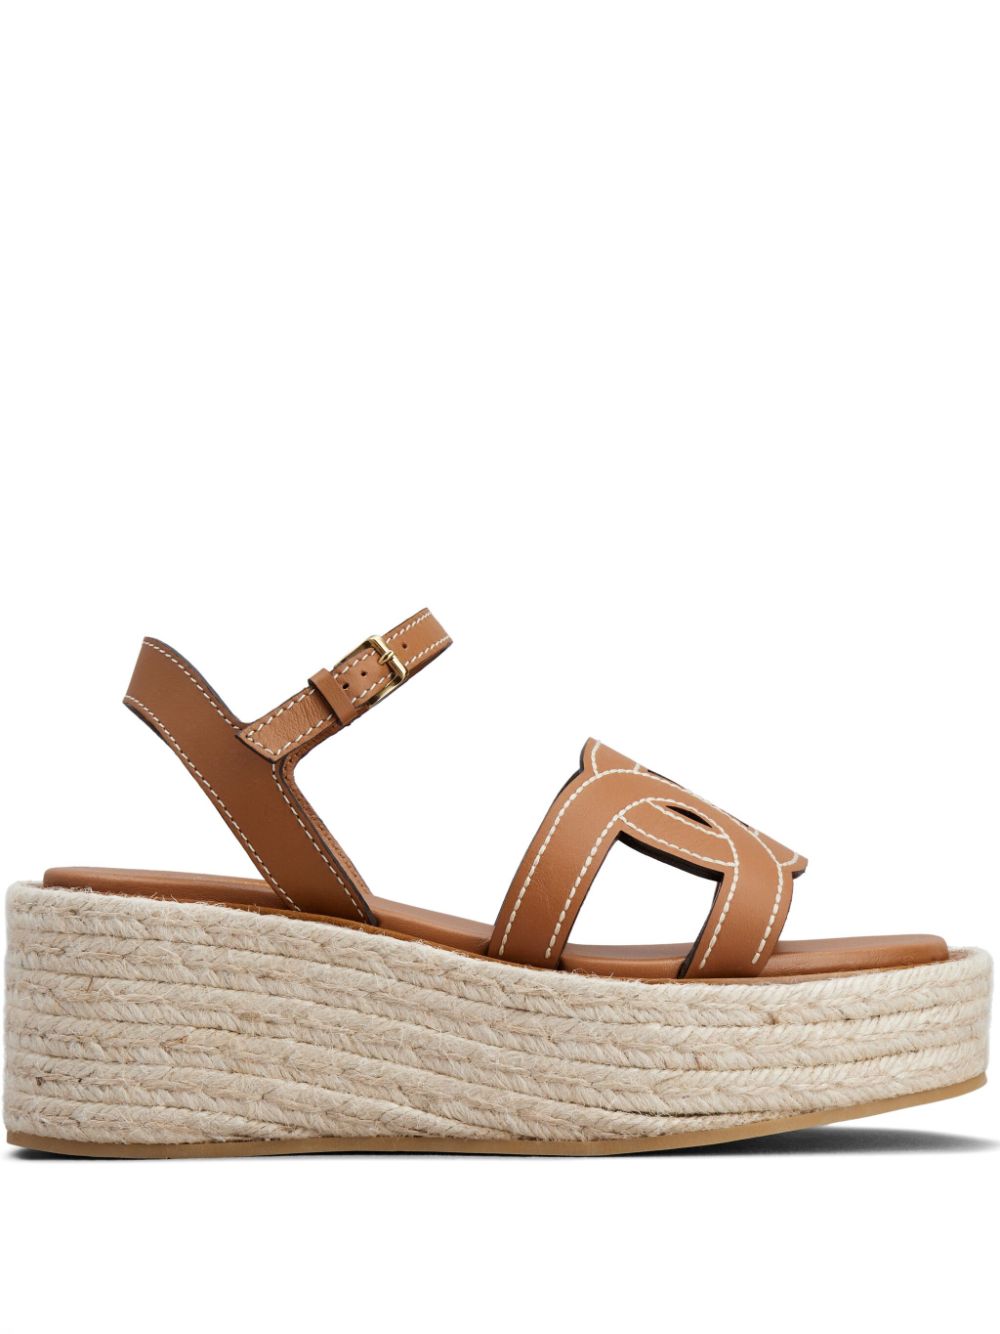 TOD'S Brown Leather Wedge Sandals for Women with Raffia Platform